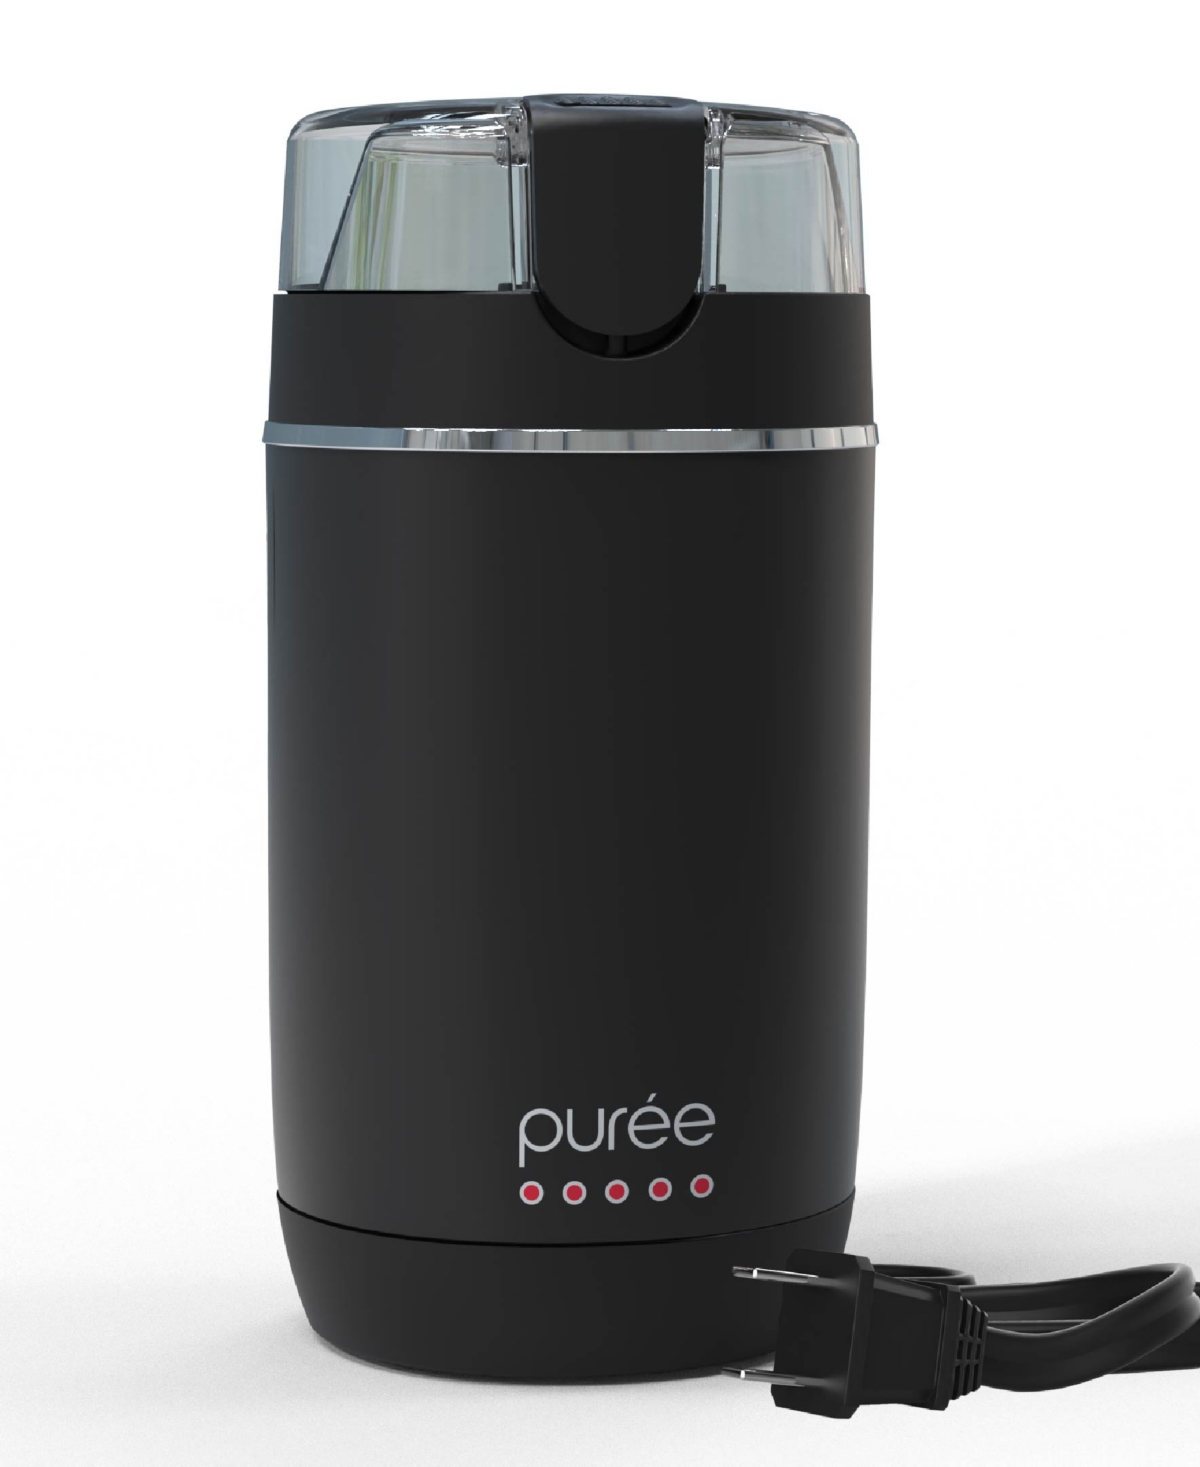 Tzumi Puree Electric Coffee Grinder, One-touch Spice, Herb, And Coffee Bean Grinder With Stainless Steel B In Black